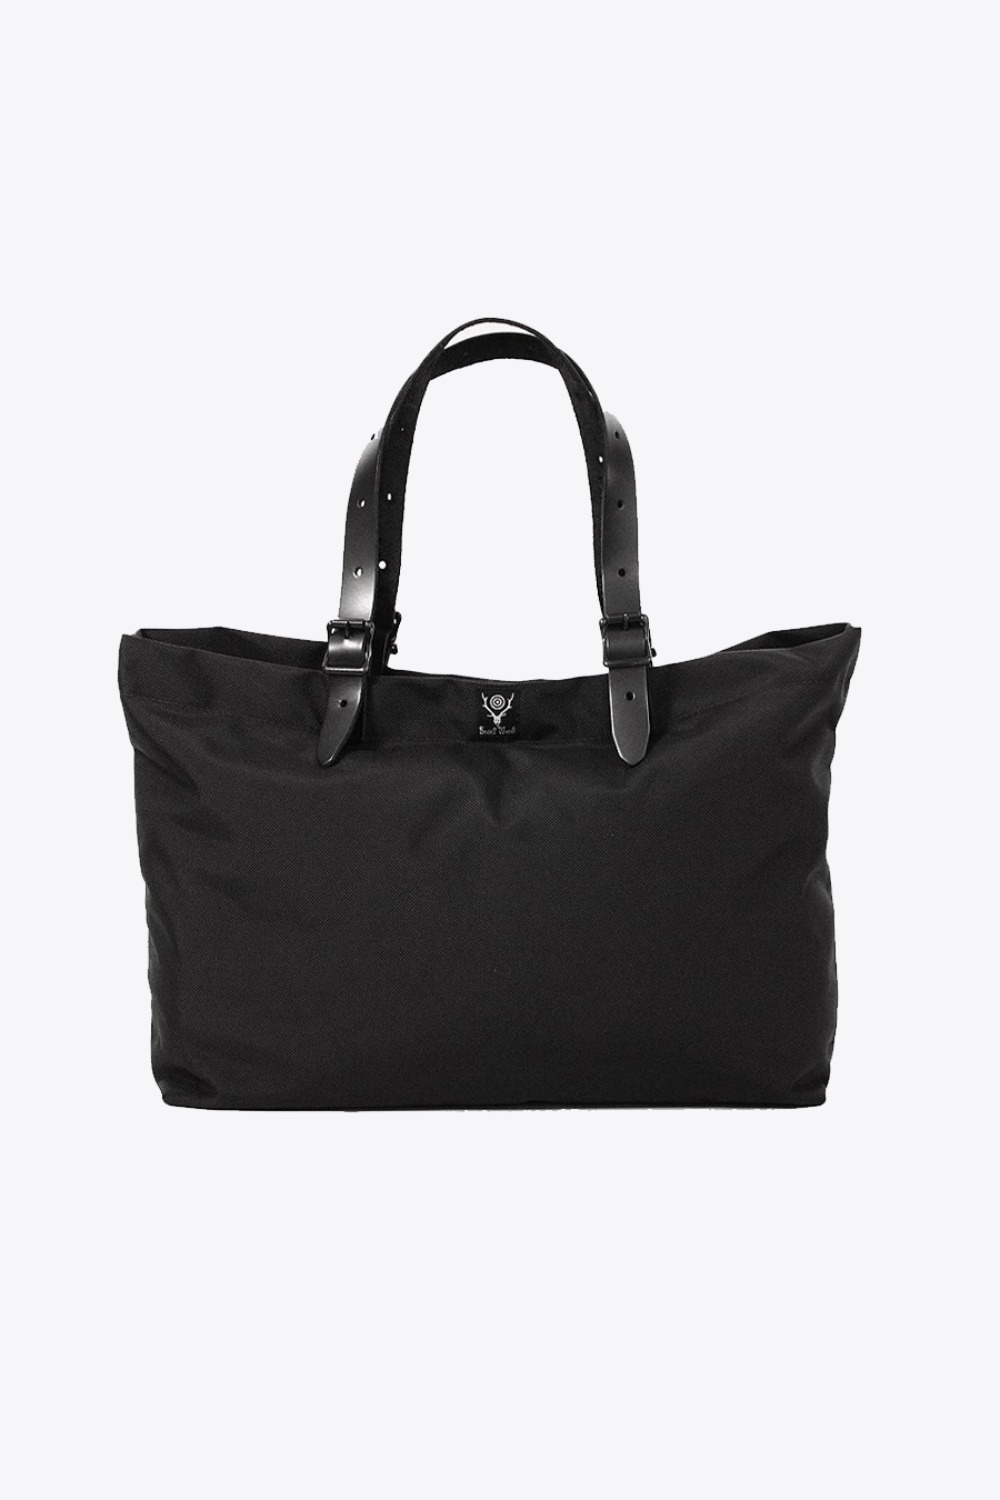 CLASSIC CANAL PARK TOTE BLACK BALISTIC